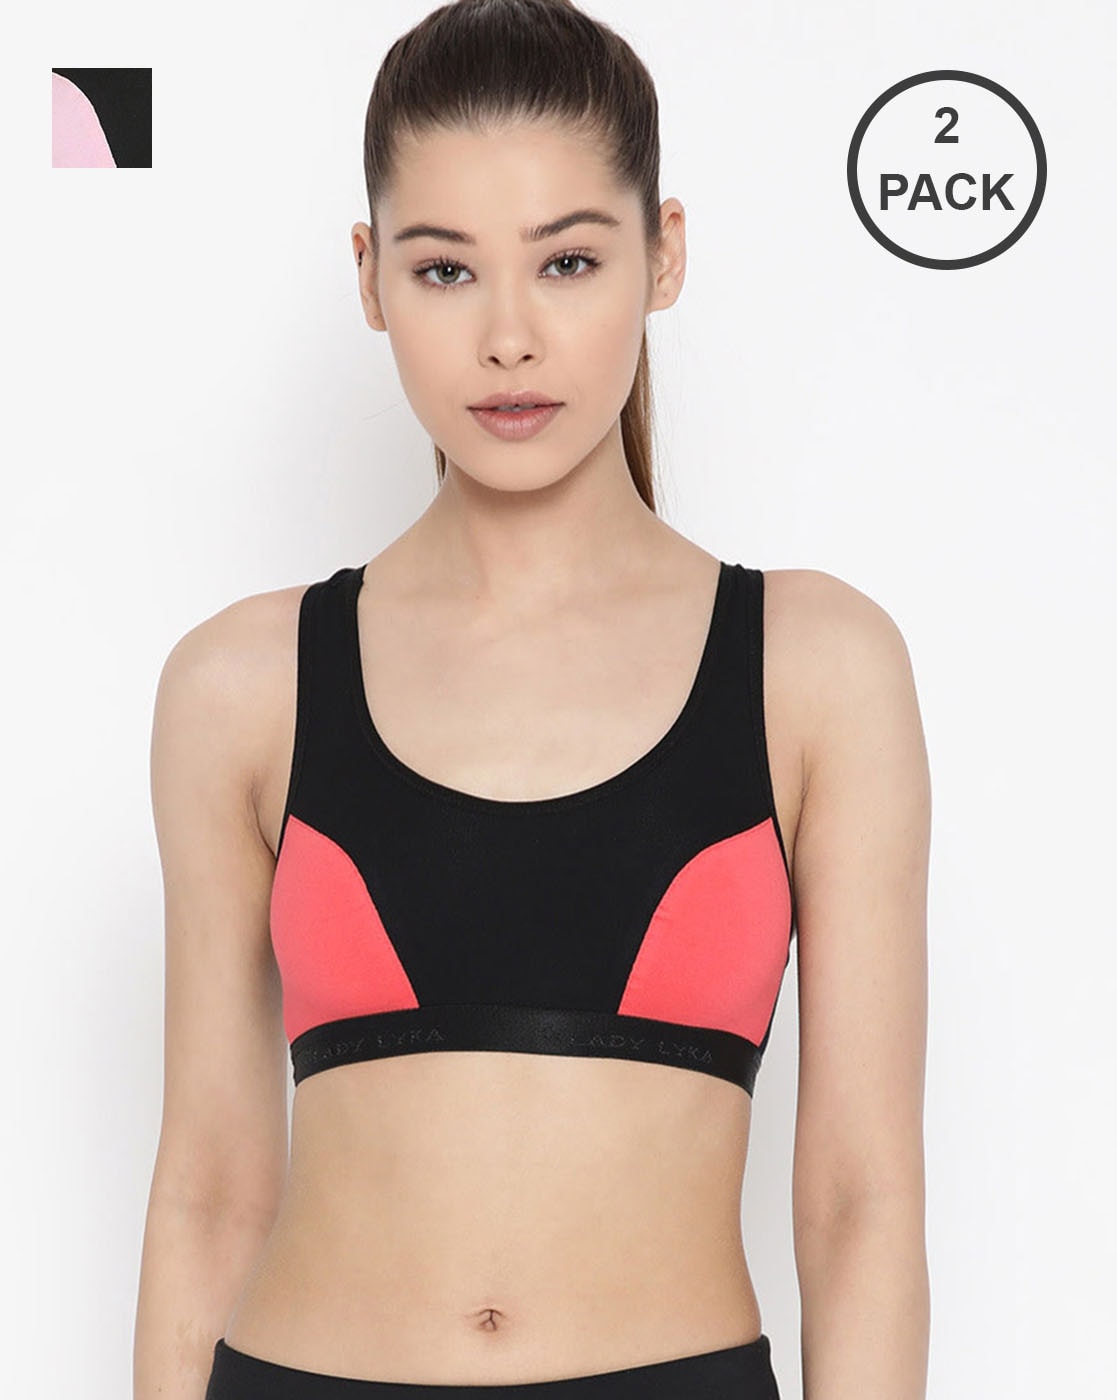 Buy online Pack Of 2 Non Padded Sports Bra from lingerie for Women by Lady  Lyka for ₹609 at 39% off